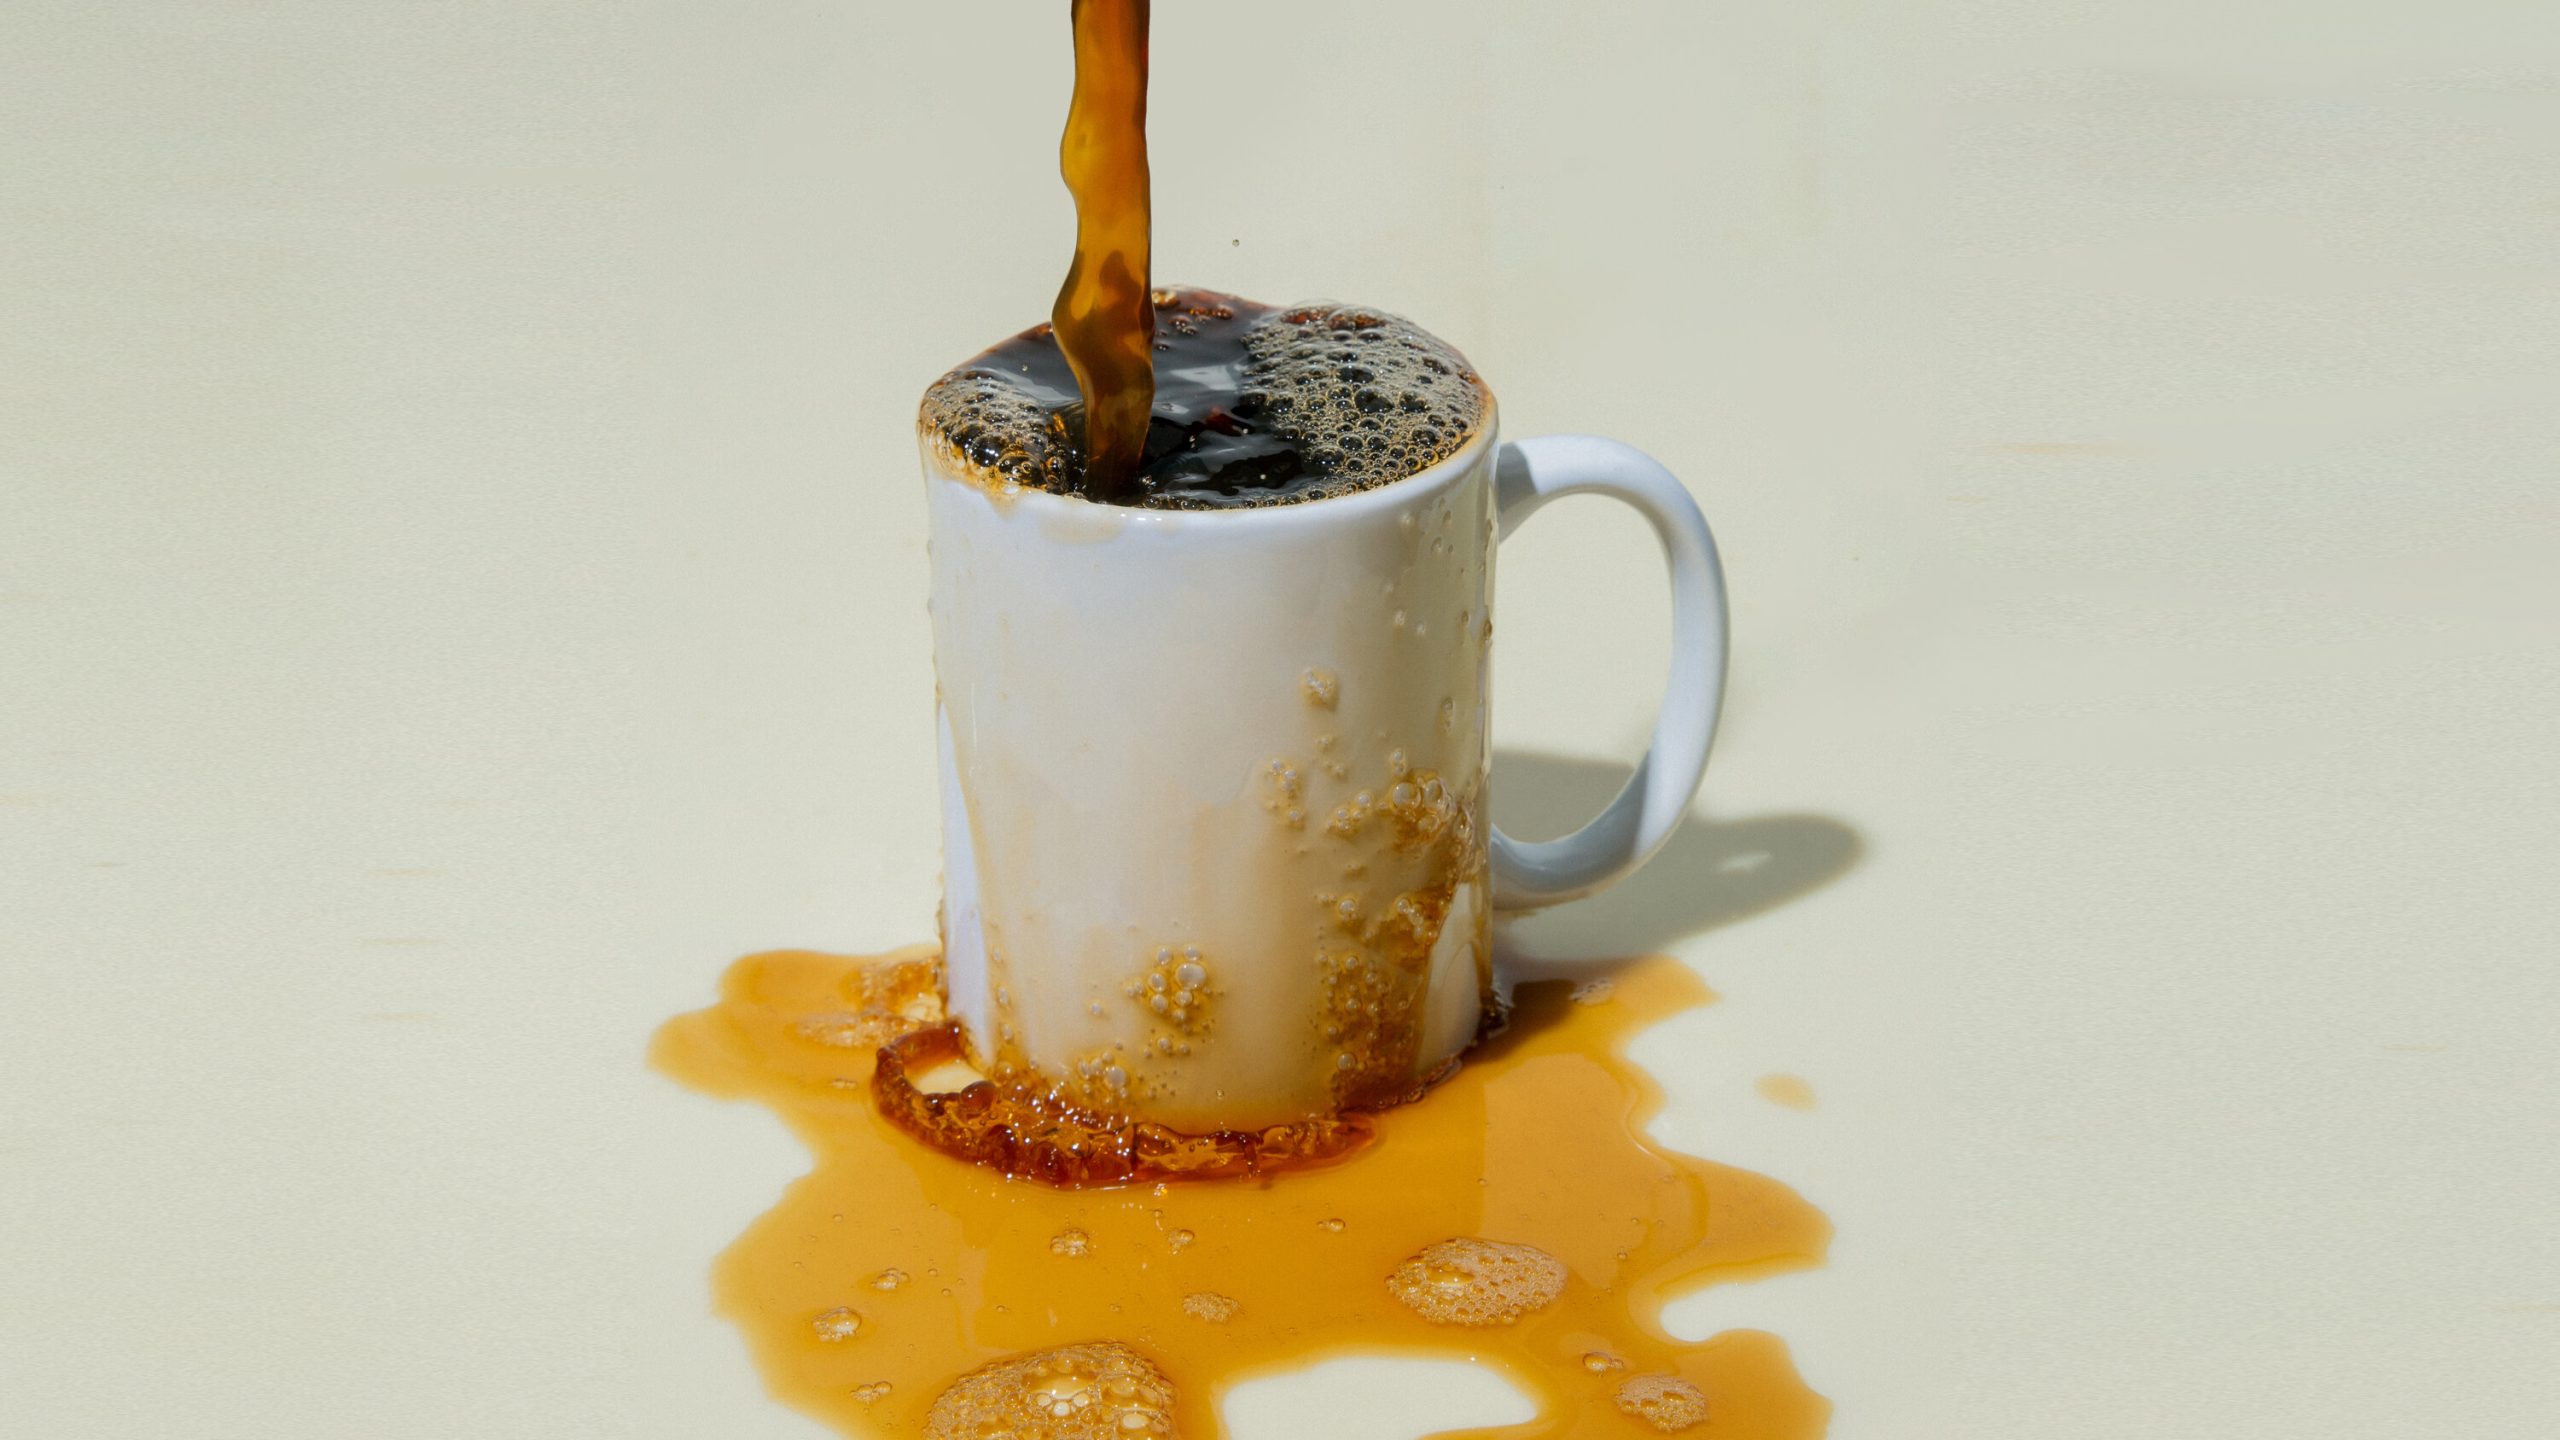 Like Watery Coffee: Exploring the Nuances of Quality Writing